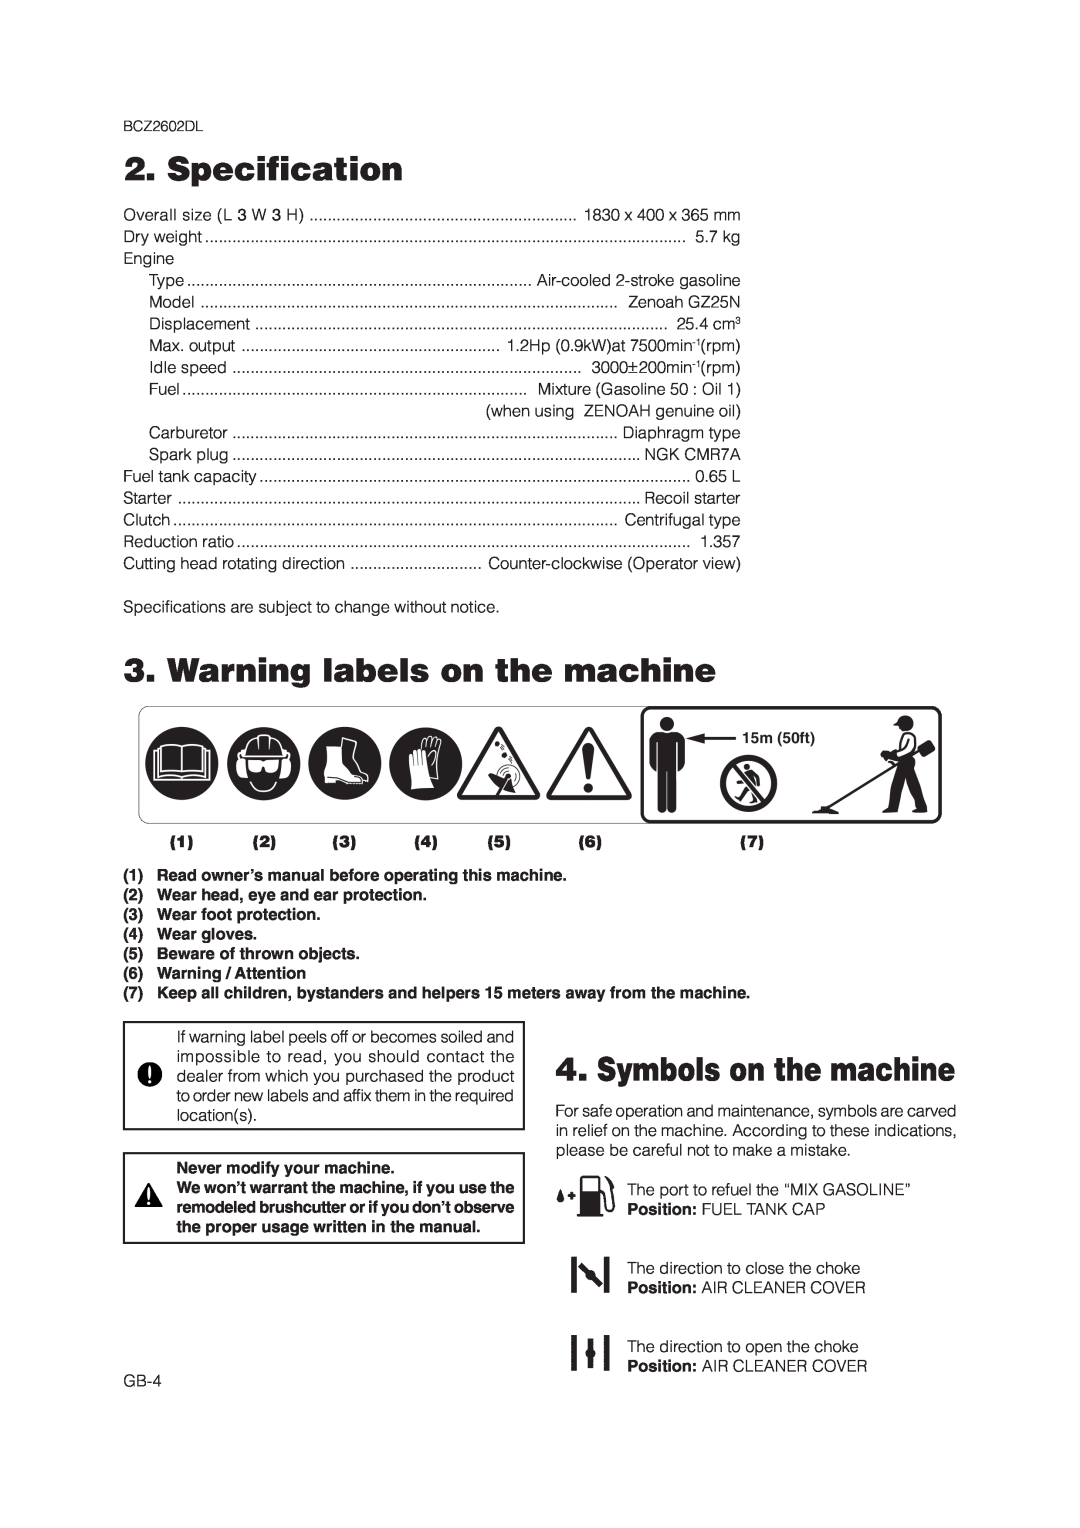 Zenoah BCZ2602DL Specification, Warning labels on the machine, Symbols on the machine, Never modify your machine 